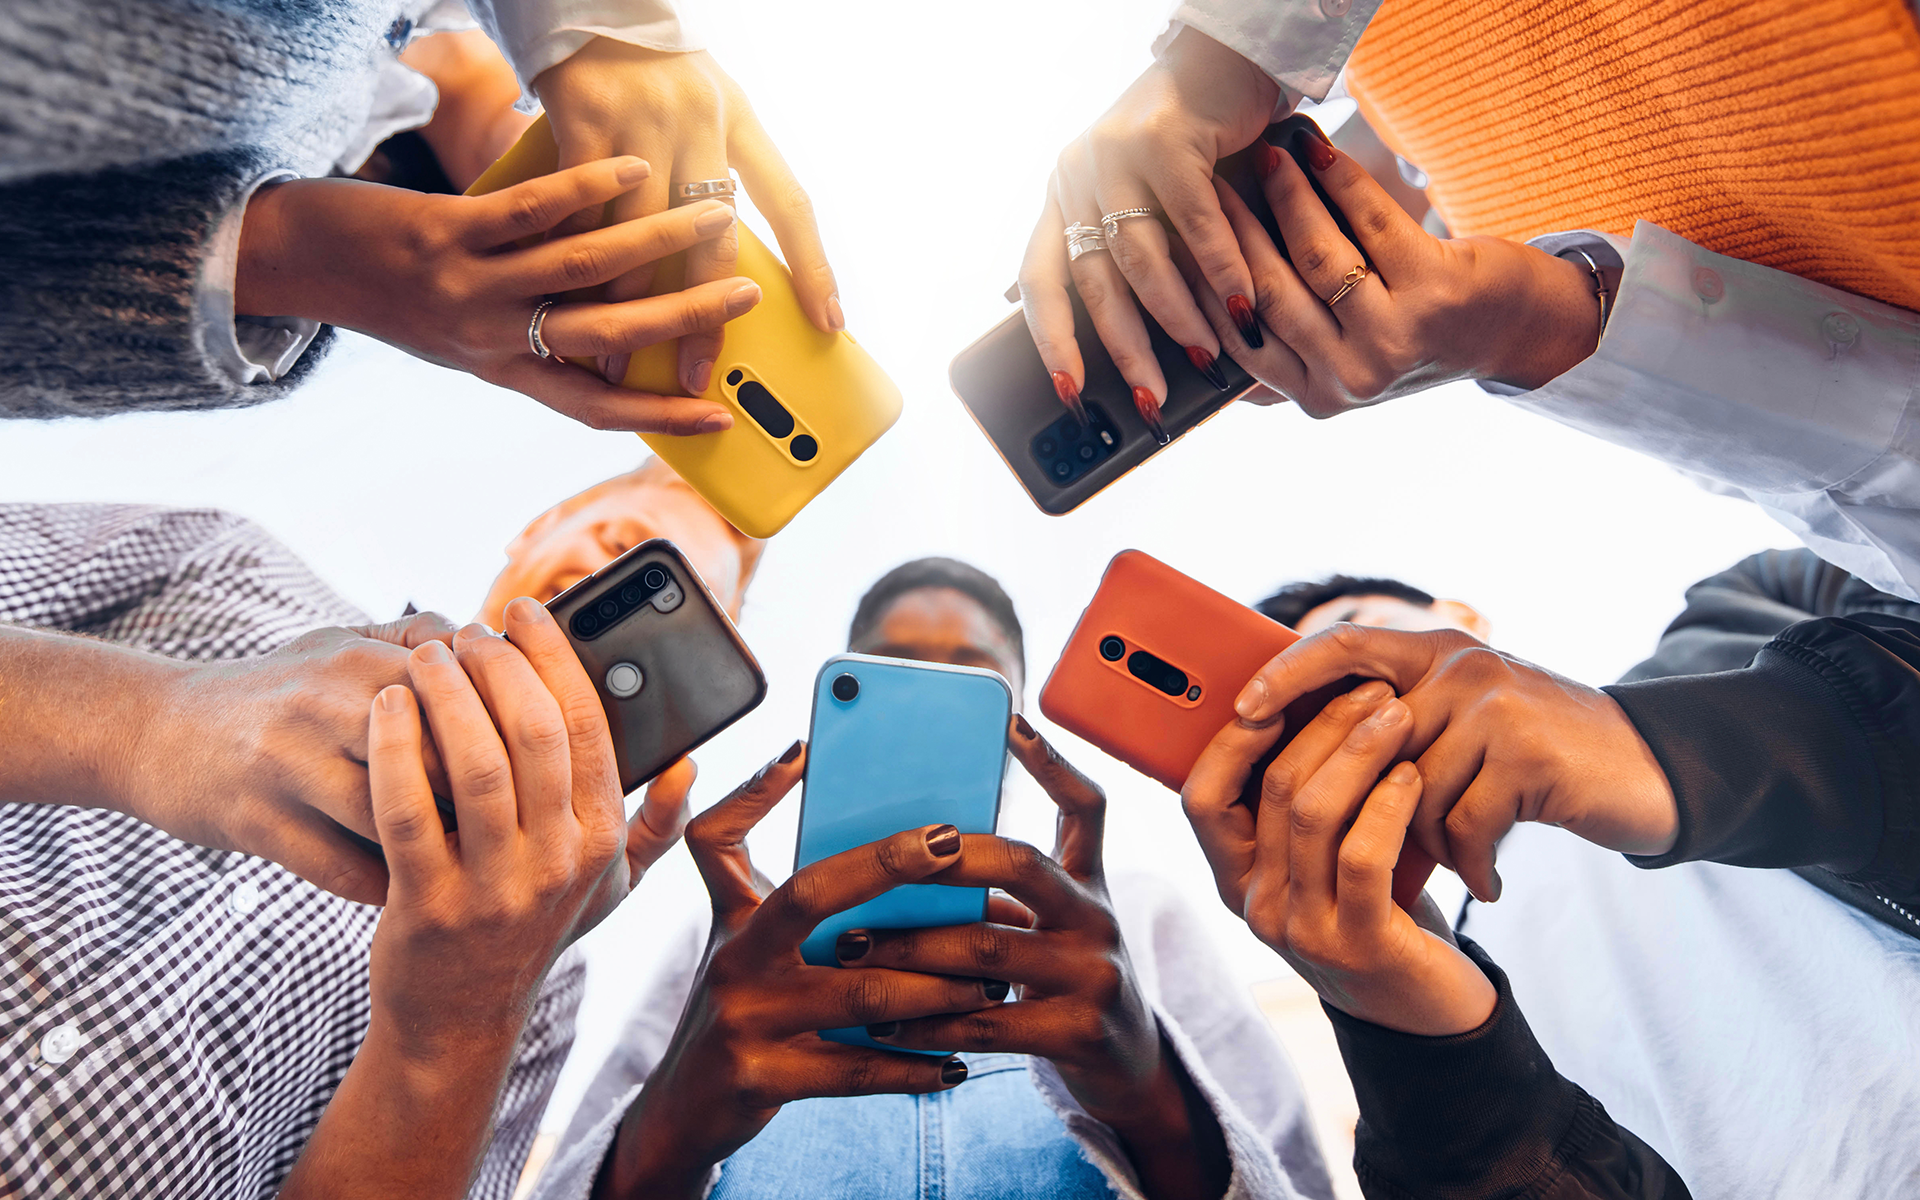 A photo shot facing upwards that captures a circle of diverse teens using their smartphones.